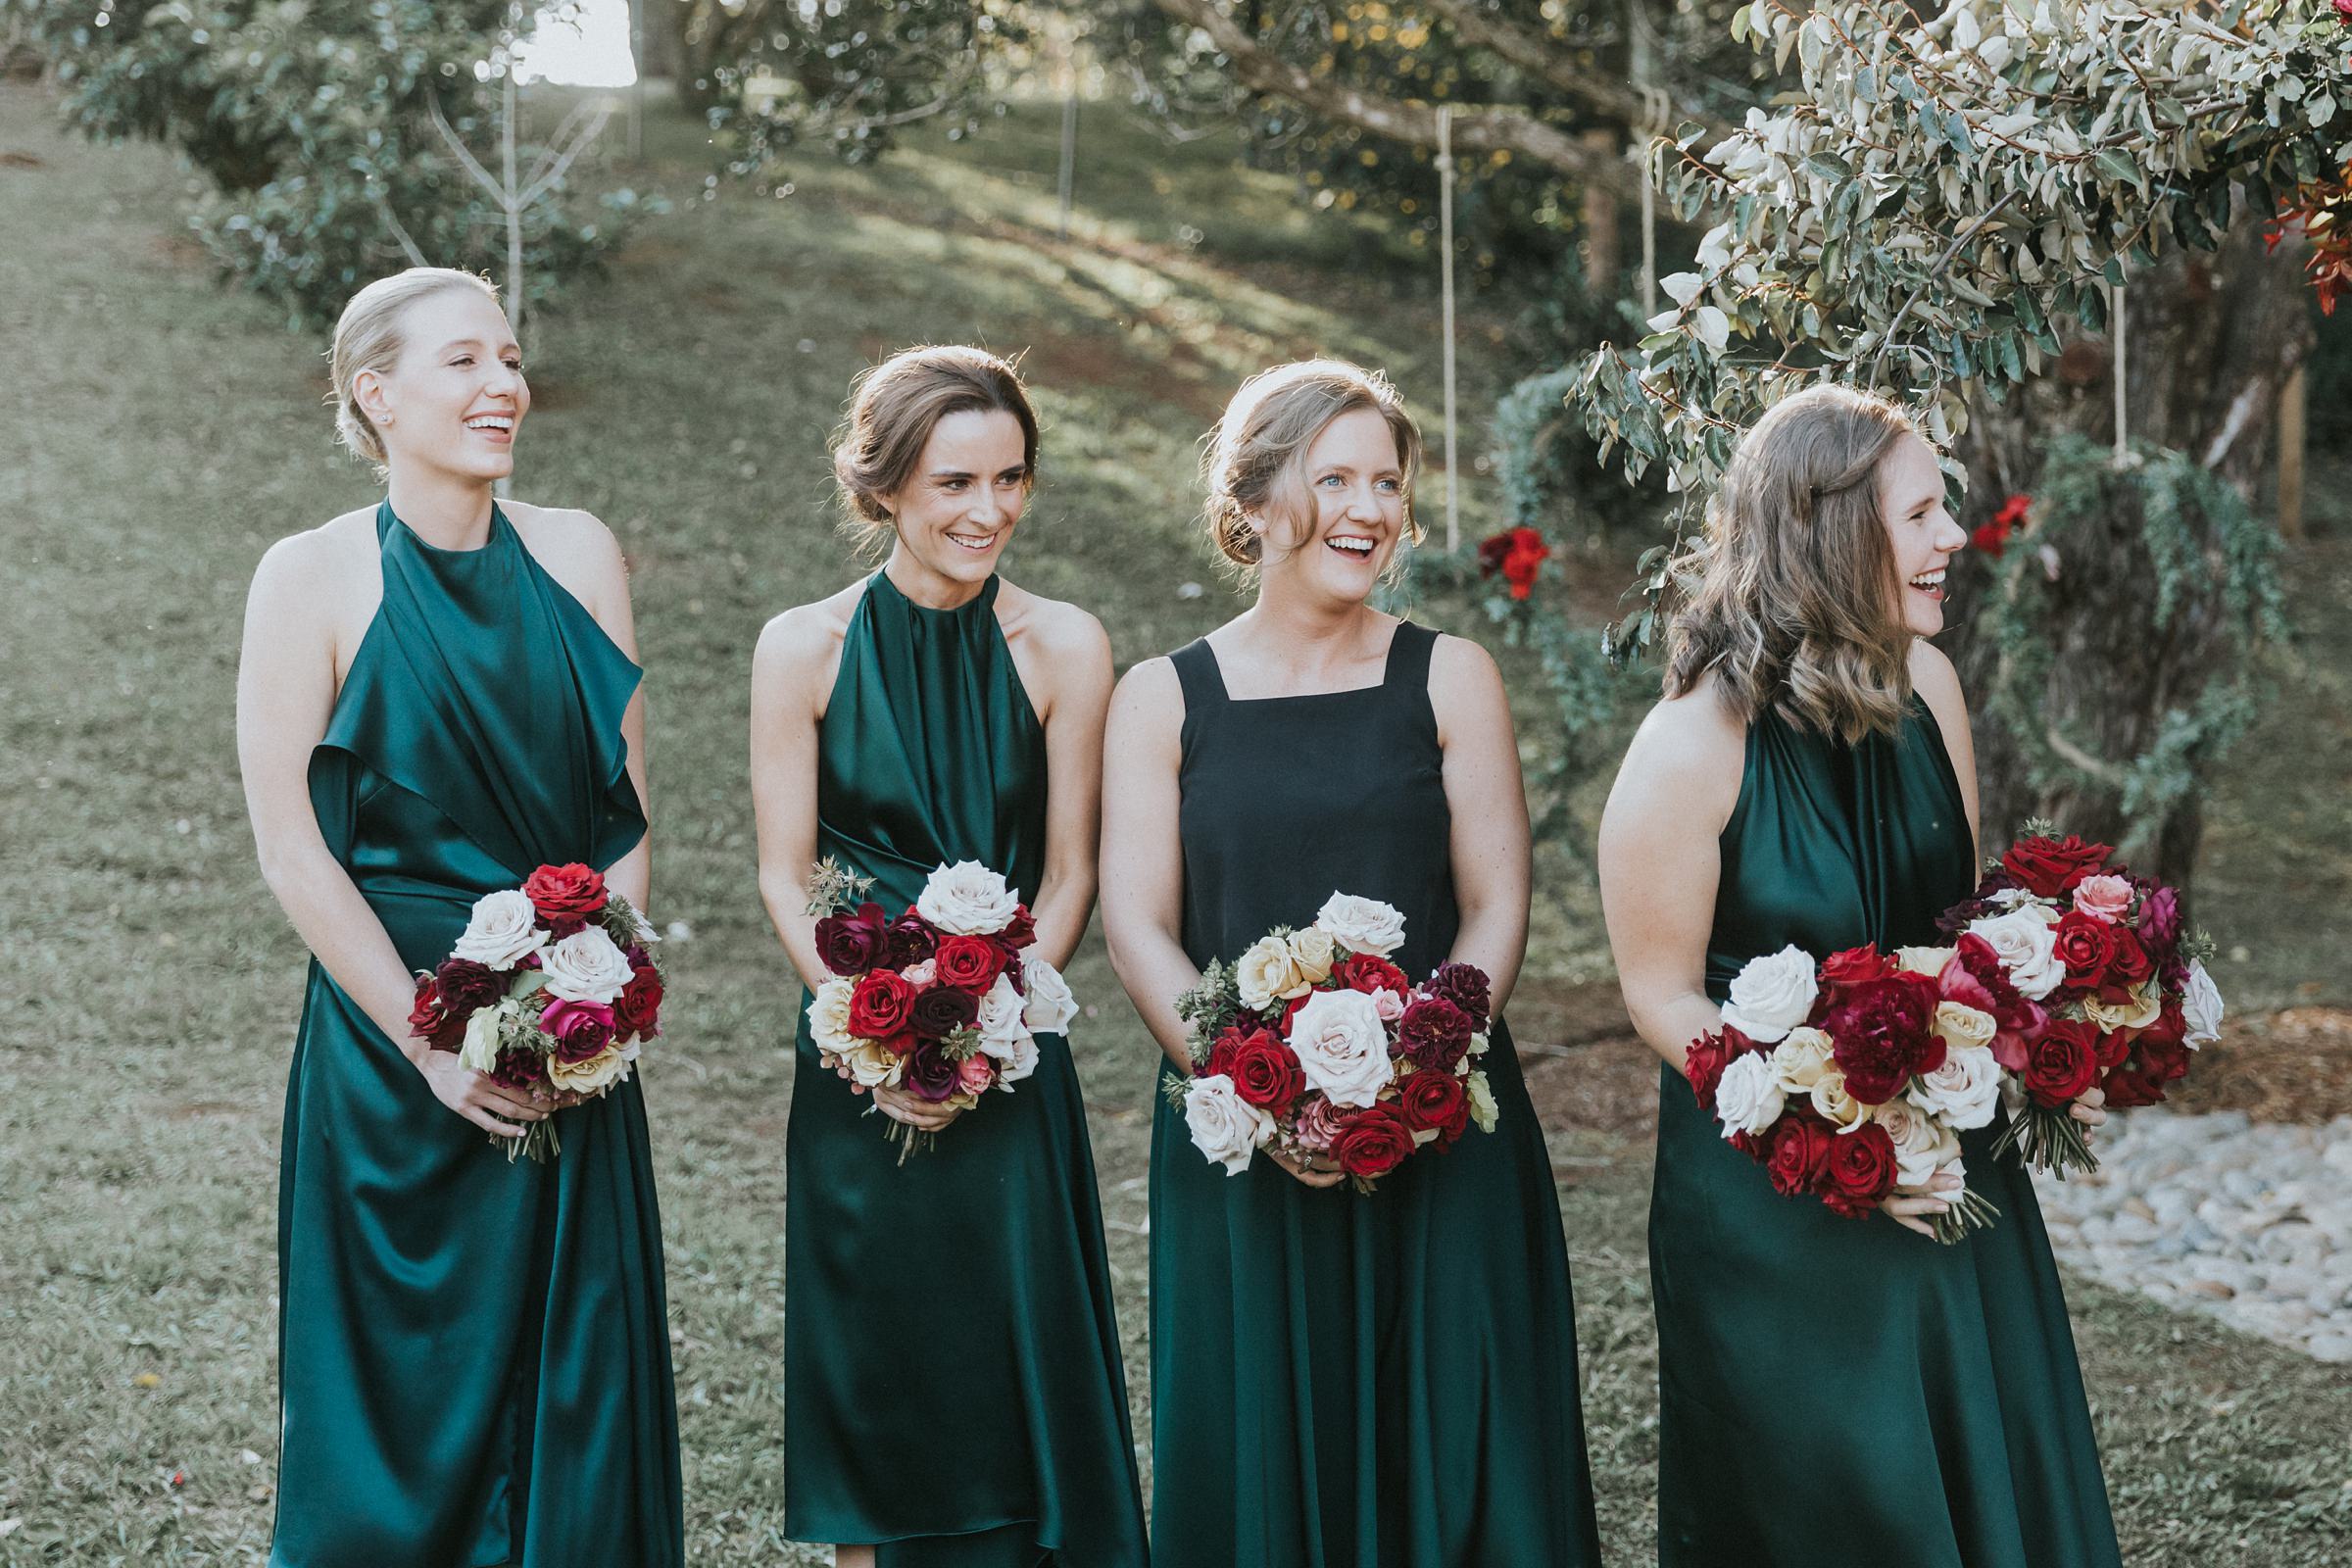 emotional and happy candid moments captured by jonathan david